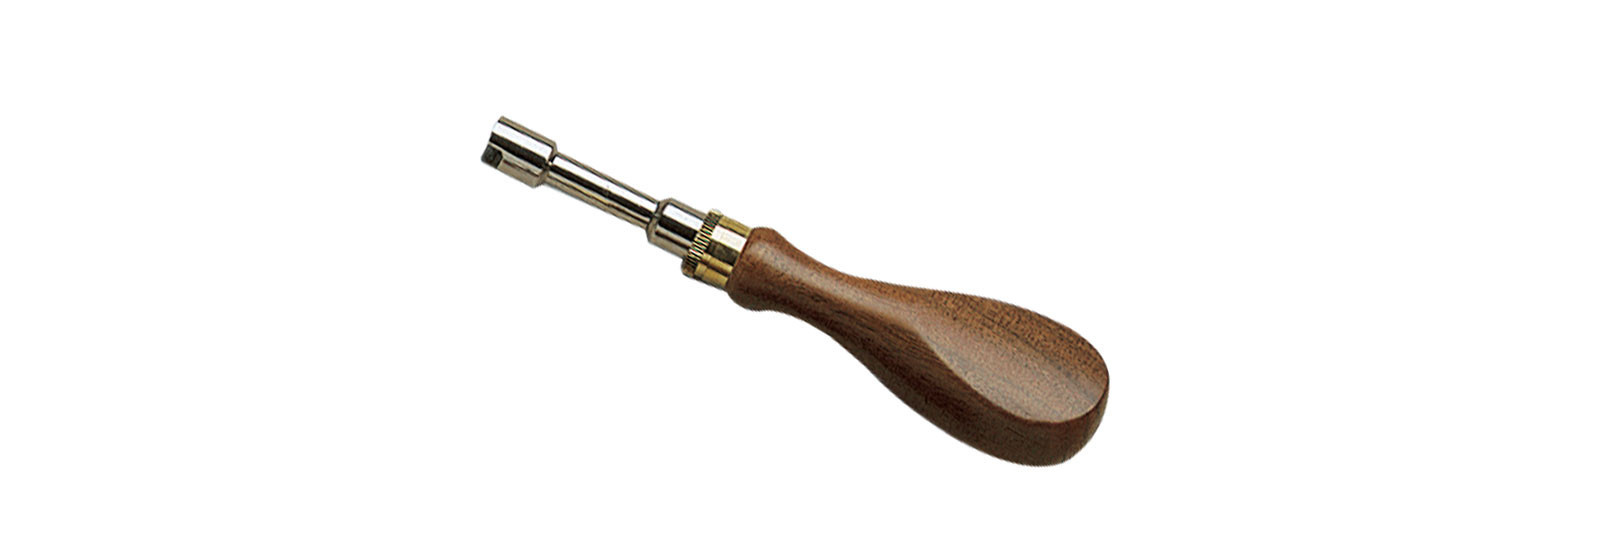 Nipple wrench wooden handle for muzzle-loading guns